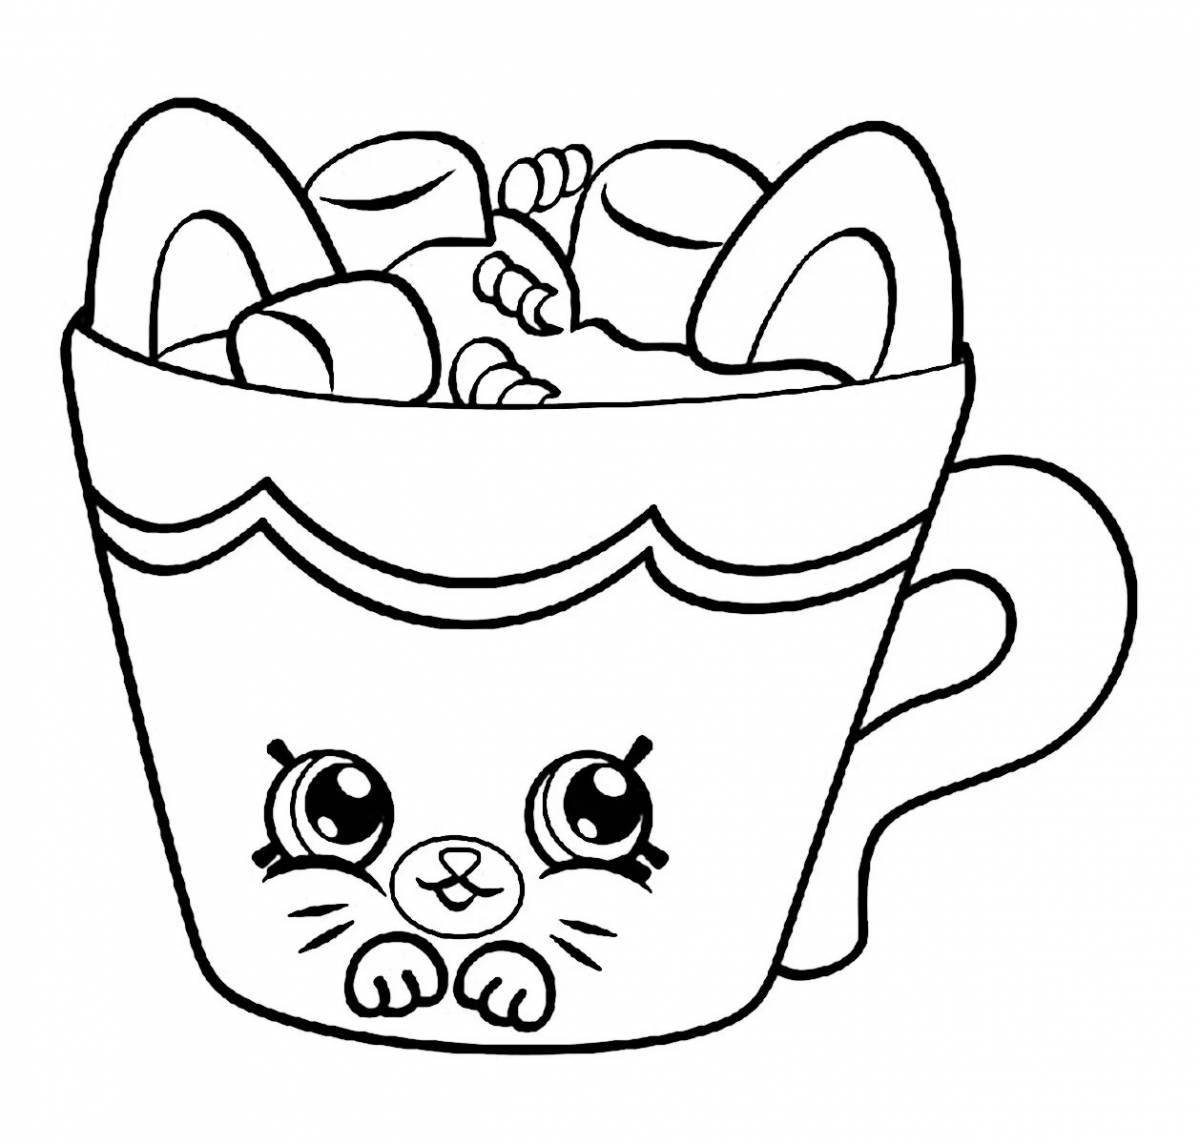 Appetizing ooty food coloring page